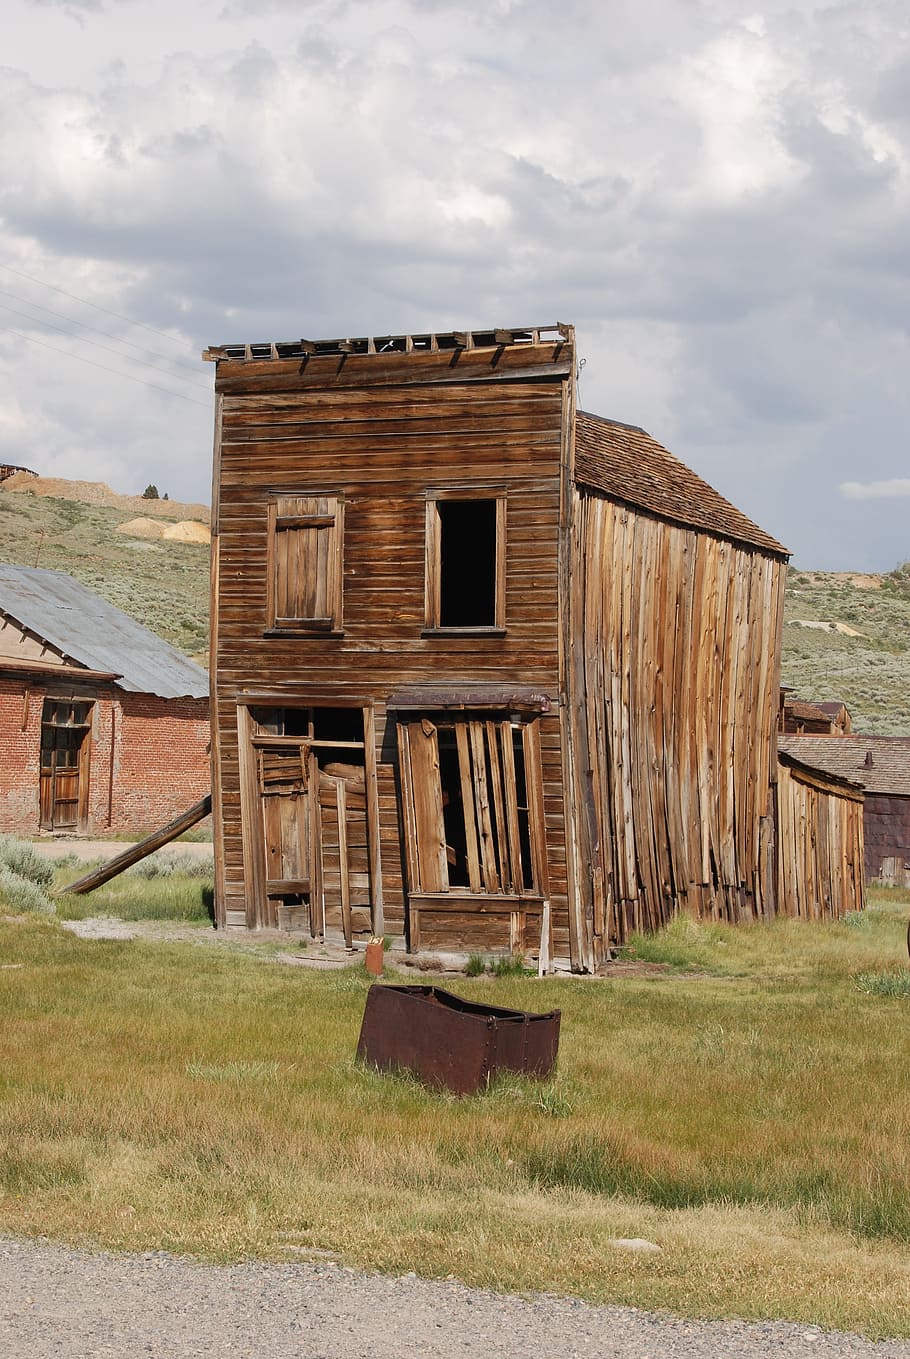 Bodie, California, Old, Village, bodie, california, left, ghost town, building exterior, house, built structure